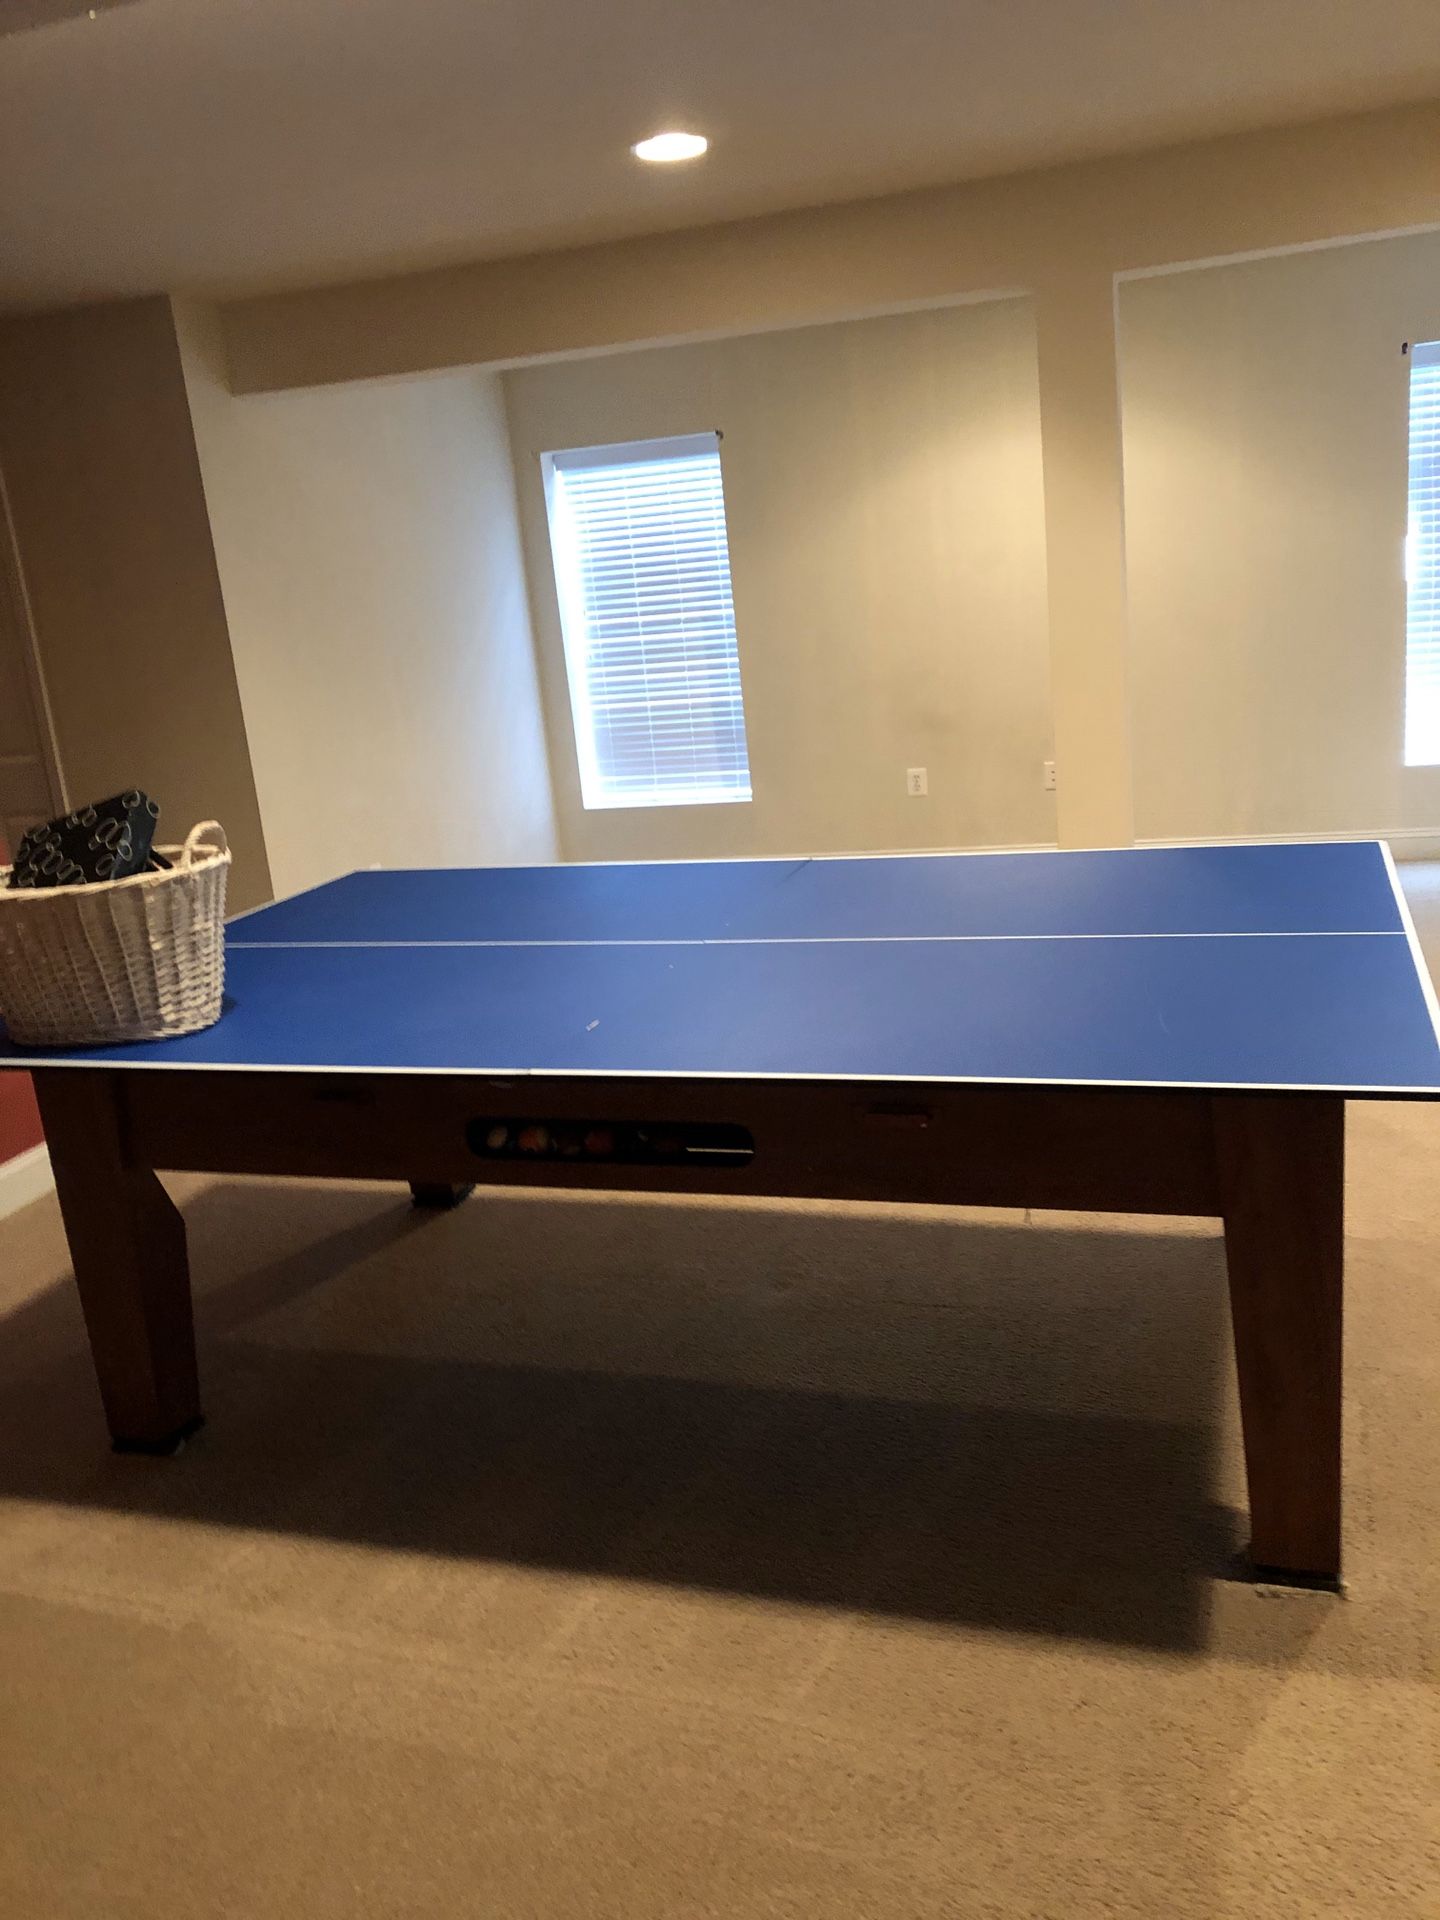 Pool table, hockey table , and ping pong table